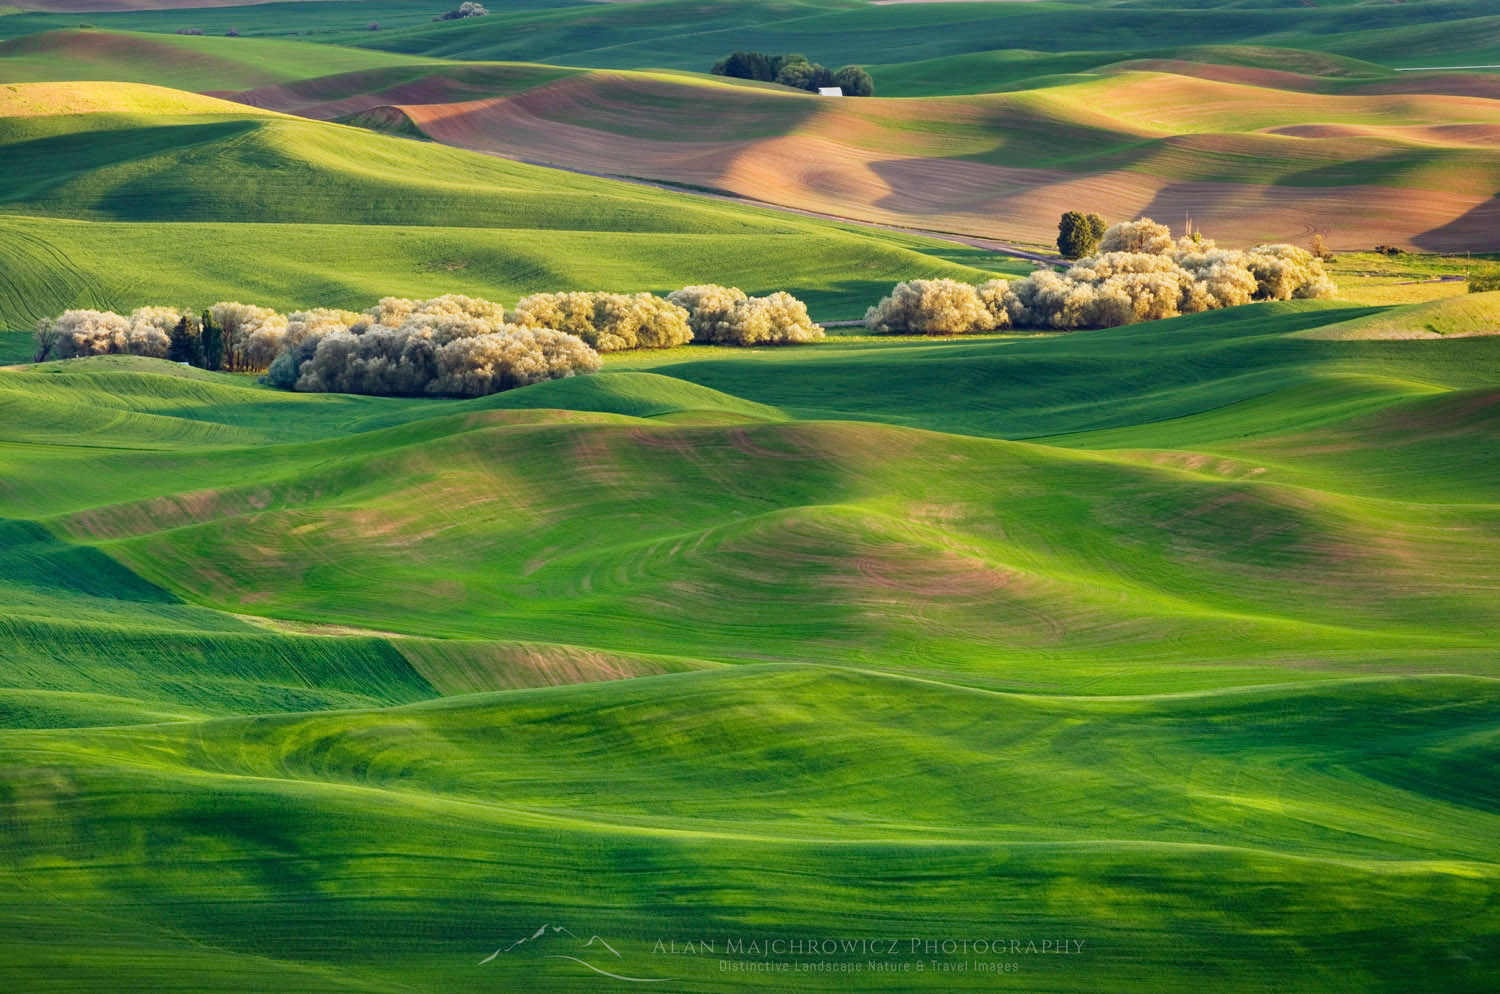 Wheatfields seen from Steptoe Butte, the Palouse region of the Inland Empire of Washington #51646